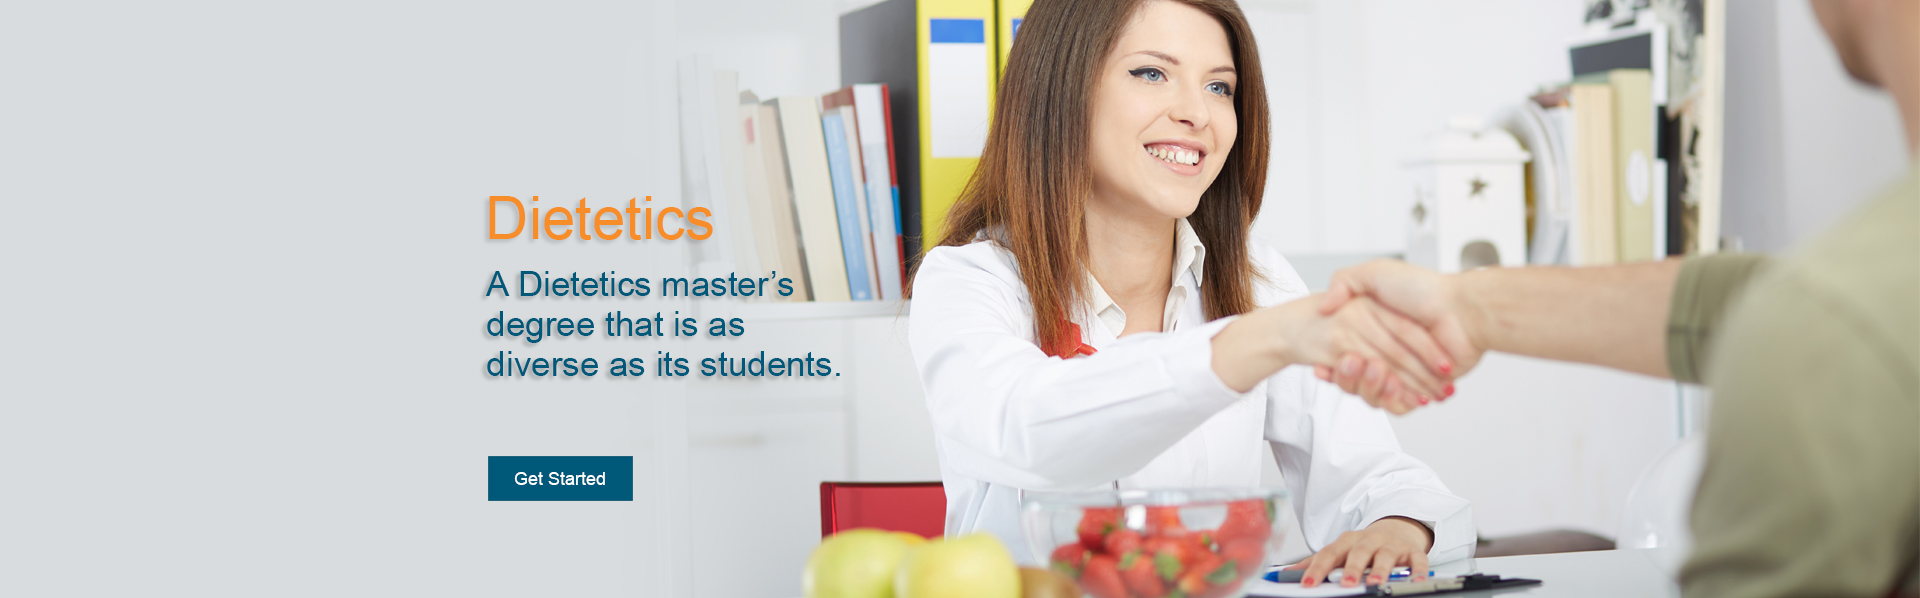 A young female nutritionist consults with a client. Learn to apply cutting-edge information in food, nutrition, food service management, and wellness with this online master’s degree in dietetics that is as diverse as its students.